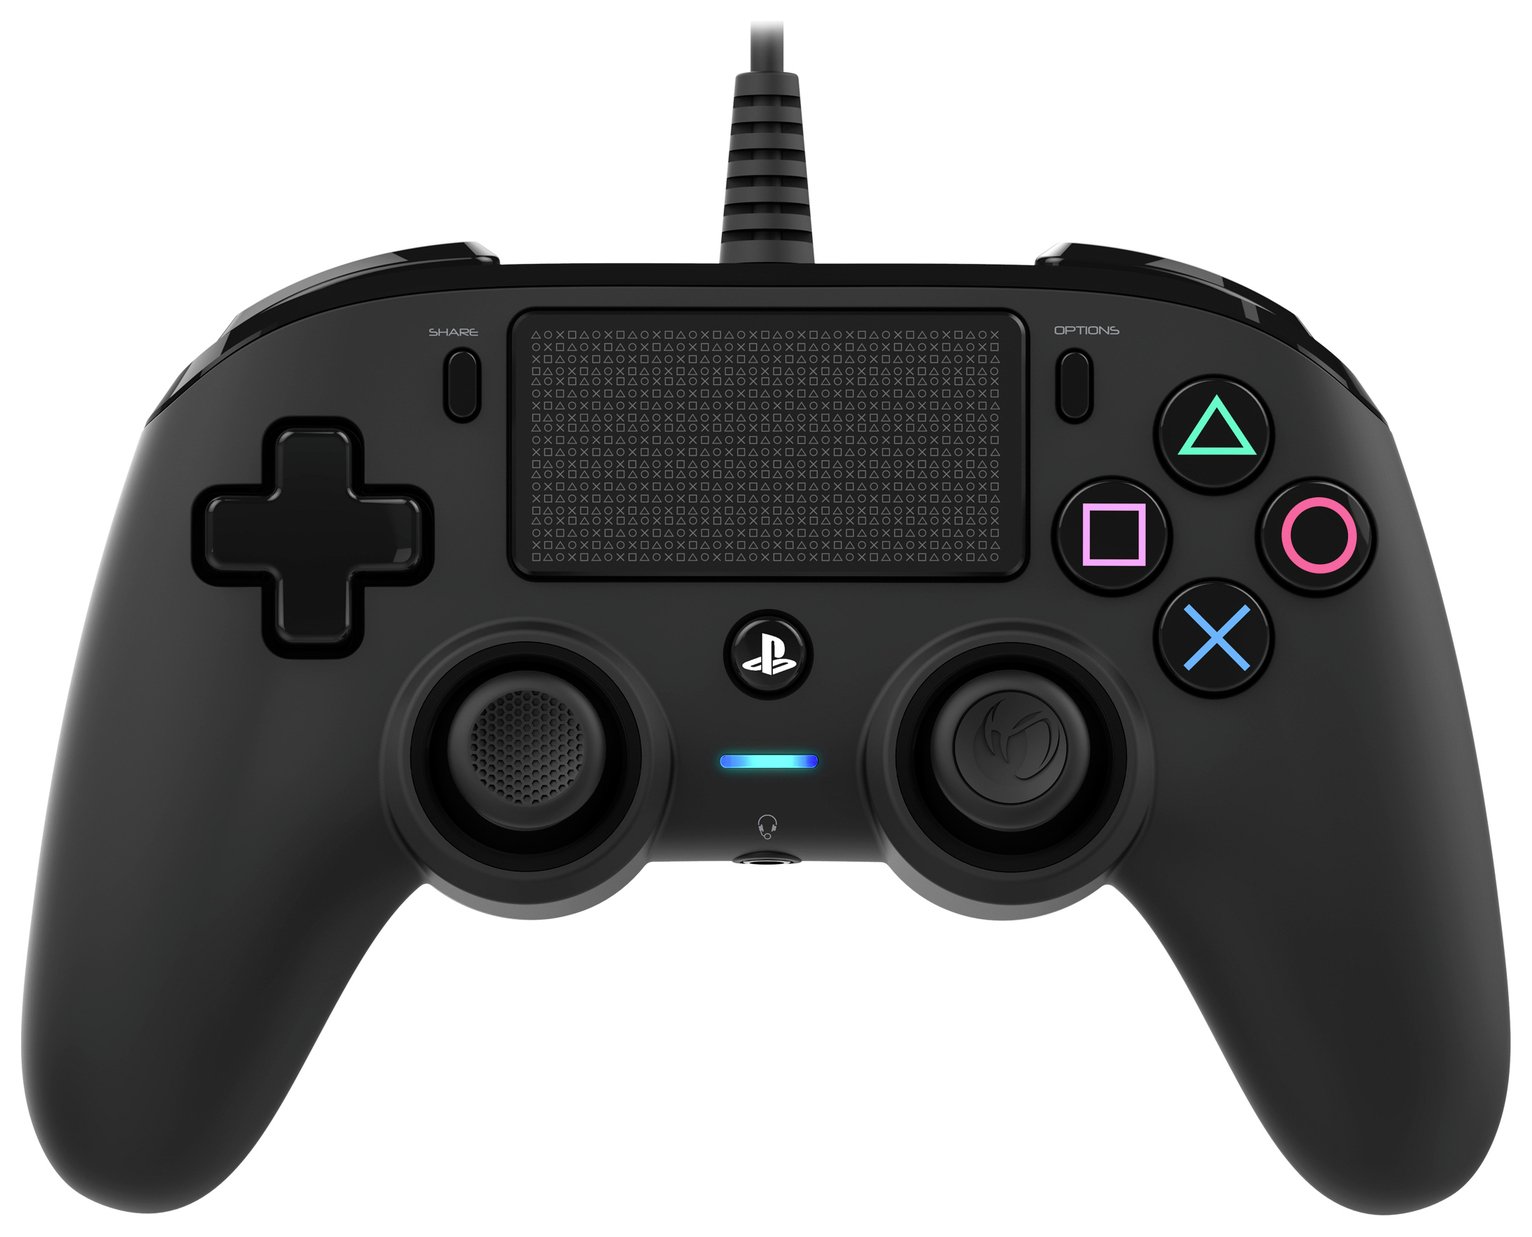 Nacon Compact PS4 Wired Controller Review